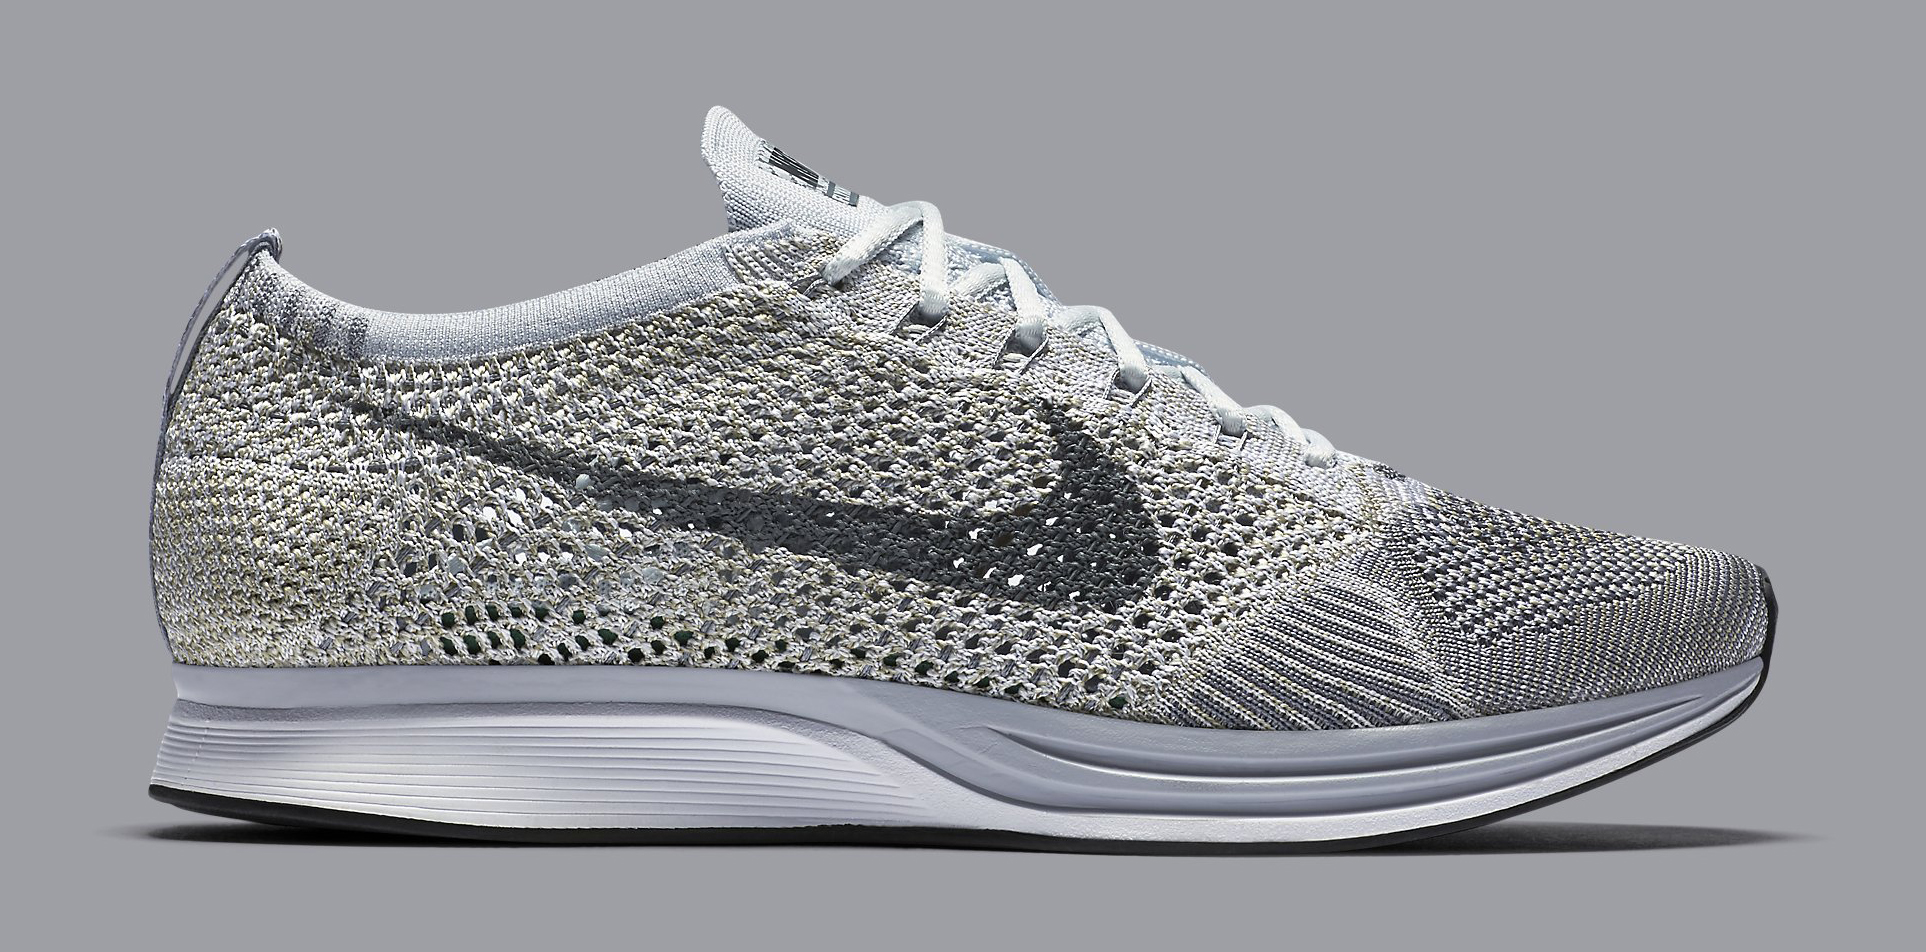 Nike Flyknit Racer Pure Platinum 862713-002 | Sole Collector